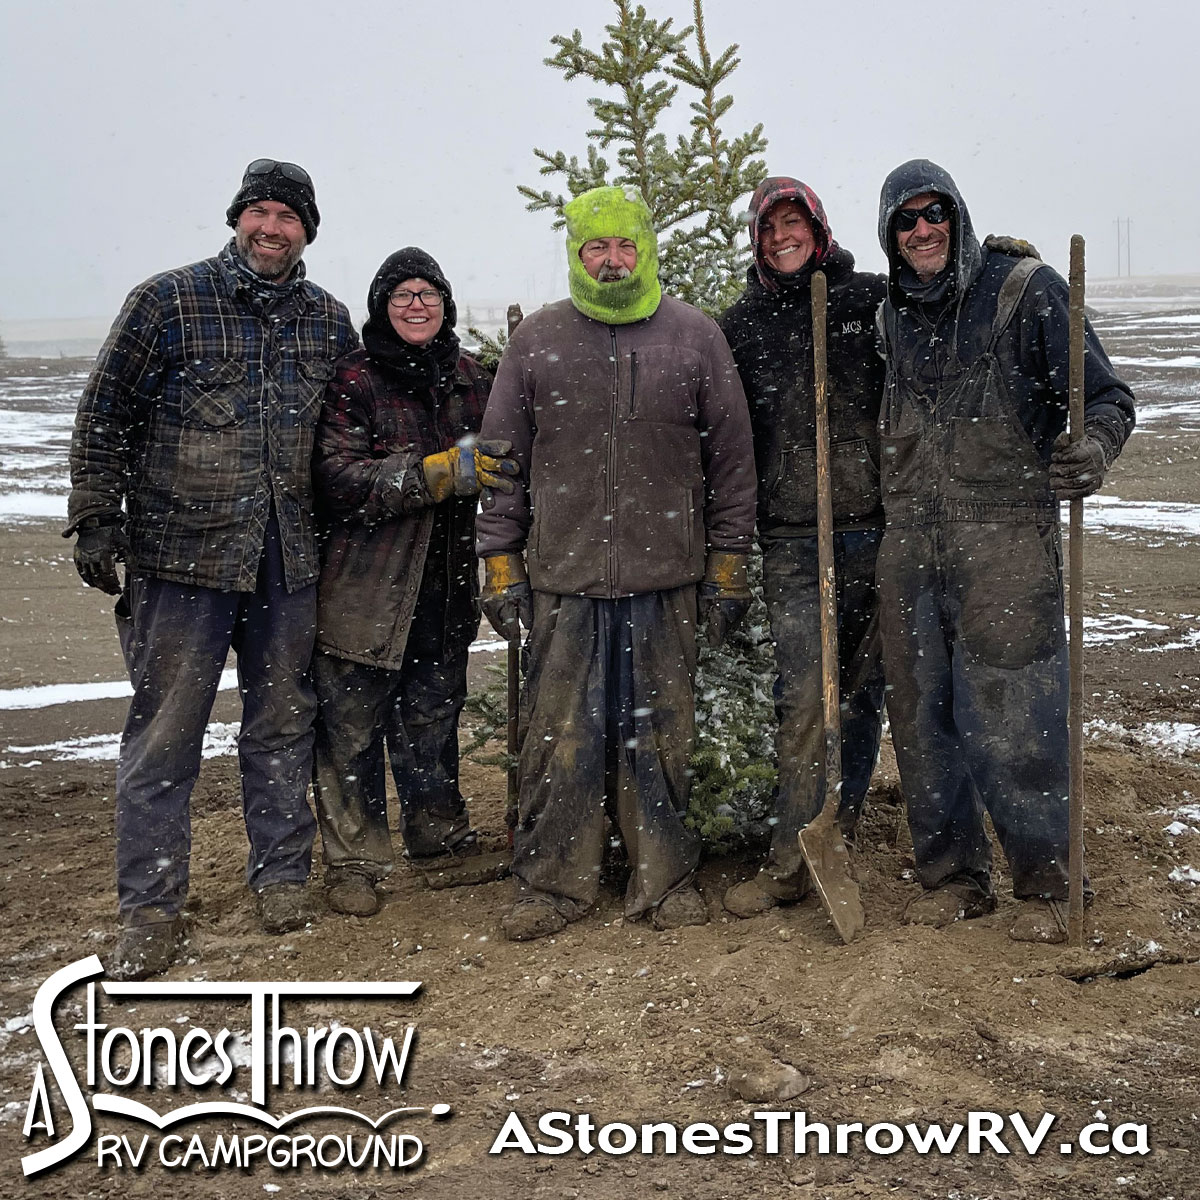 36" Basket Tree Planting Party at A Stones Throw RV Campground Planting over 200 Colorado Green and Blue Spruce Trees!